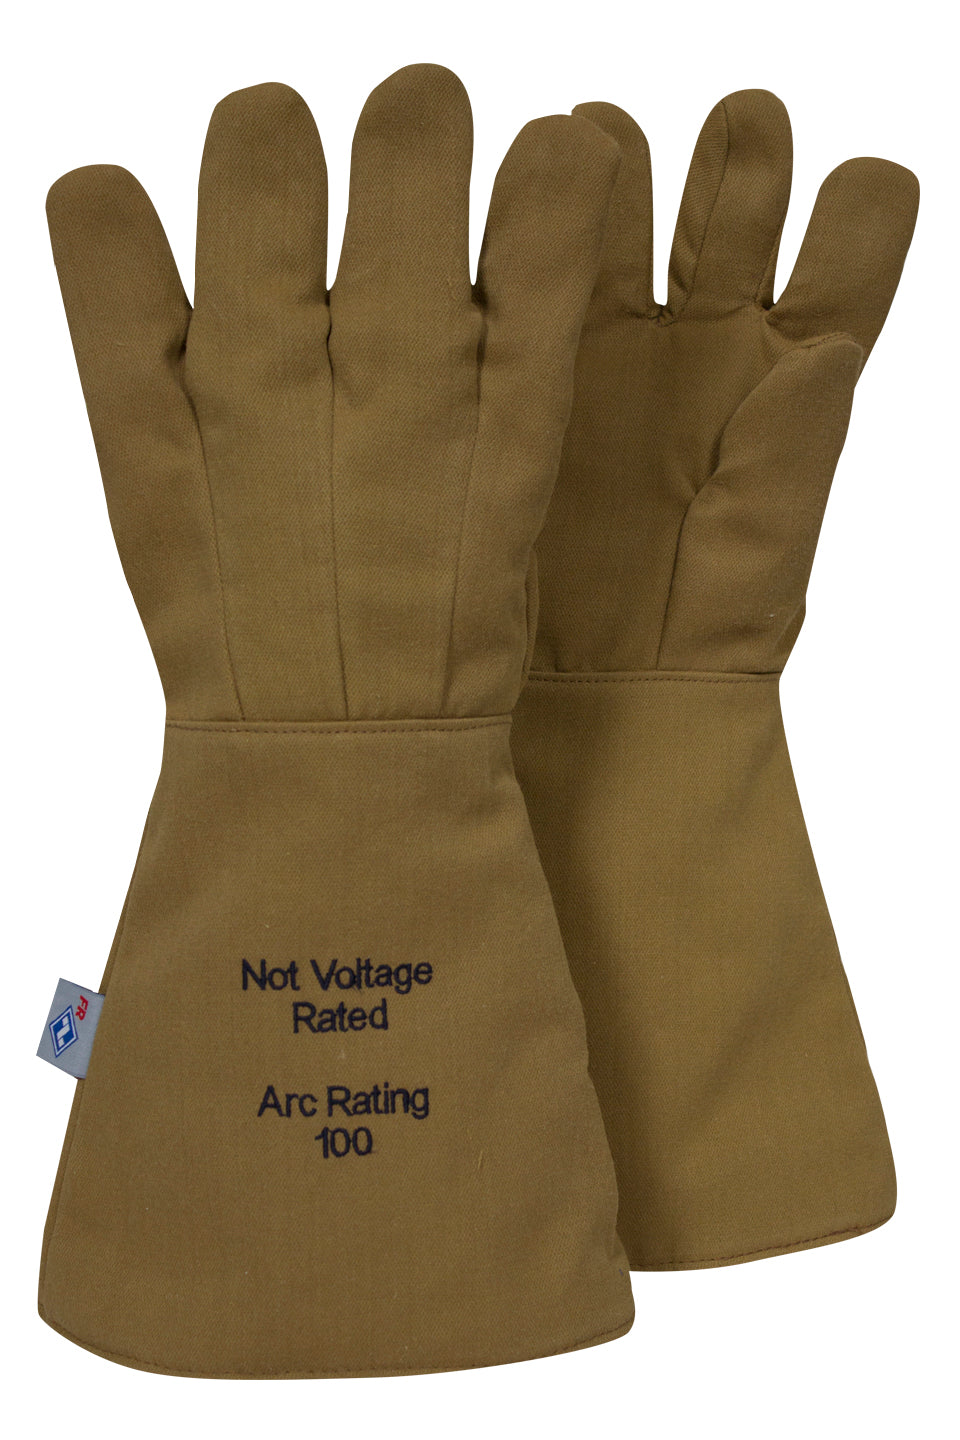 Enespro® ArcGuard® 100 cal Arc Rated Gloves, 18